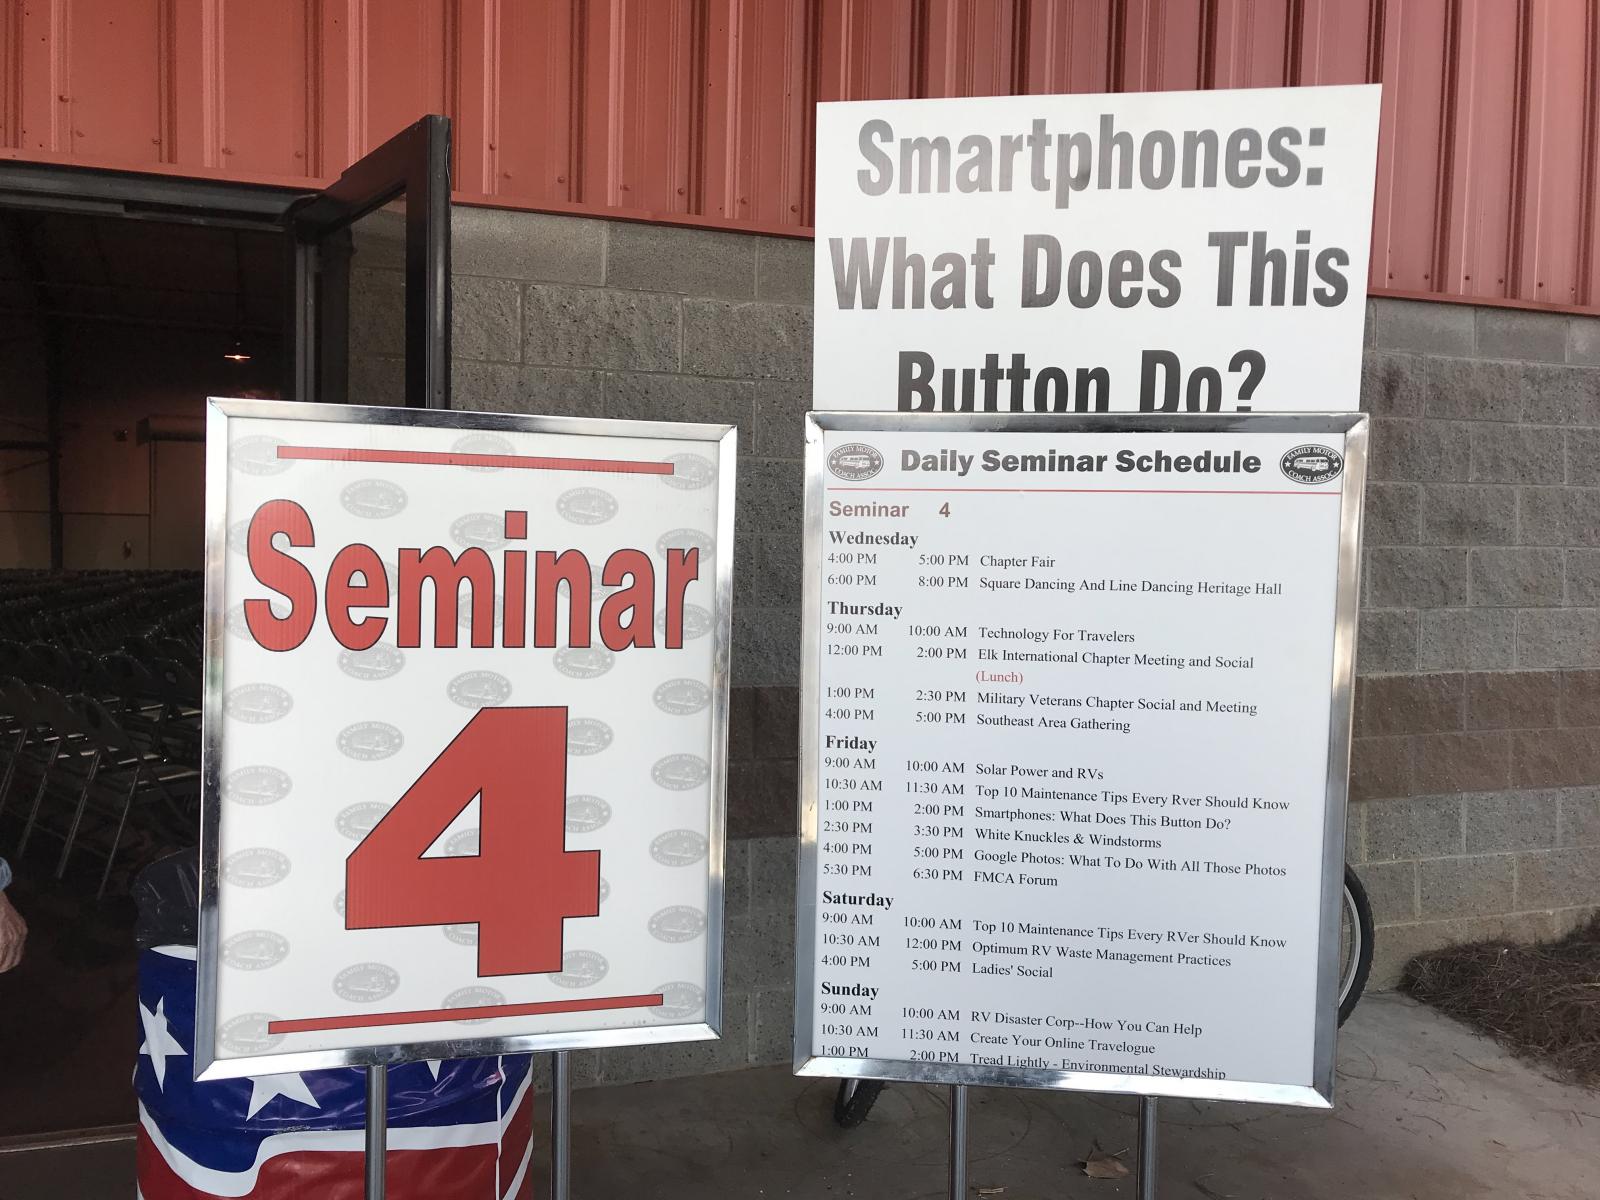 Smartphone seminar by Geeks on Tour